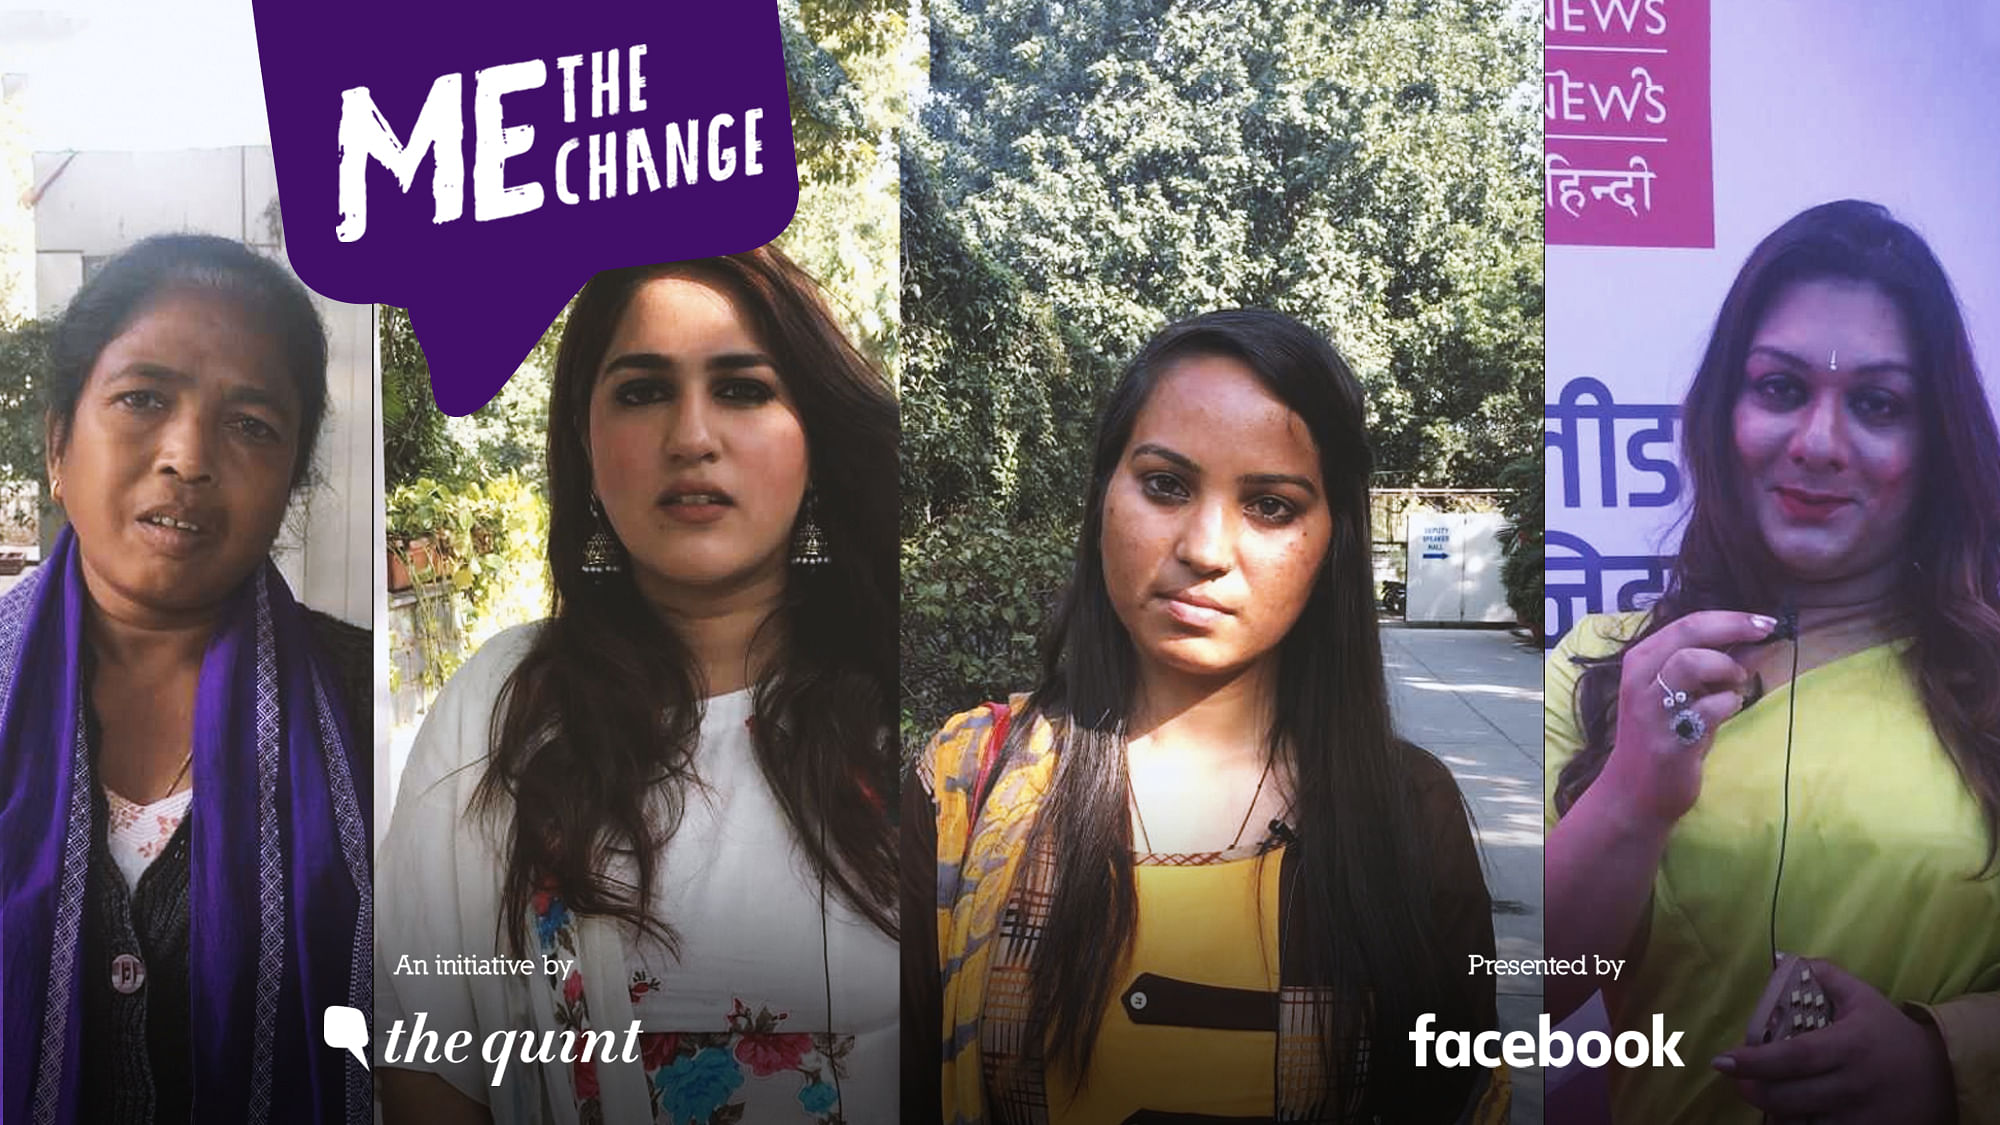 The Quint spoke to some women politicians about what they are trying to accomplish in politics, what they want for women and why there is a need for more women in the job.